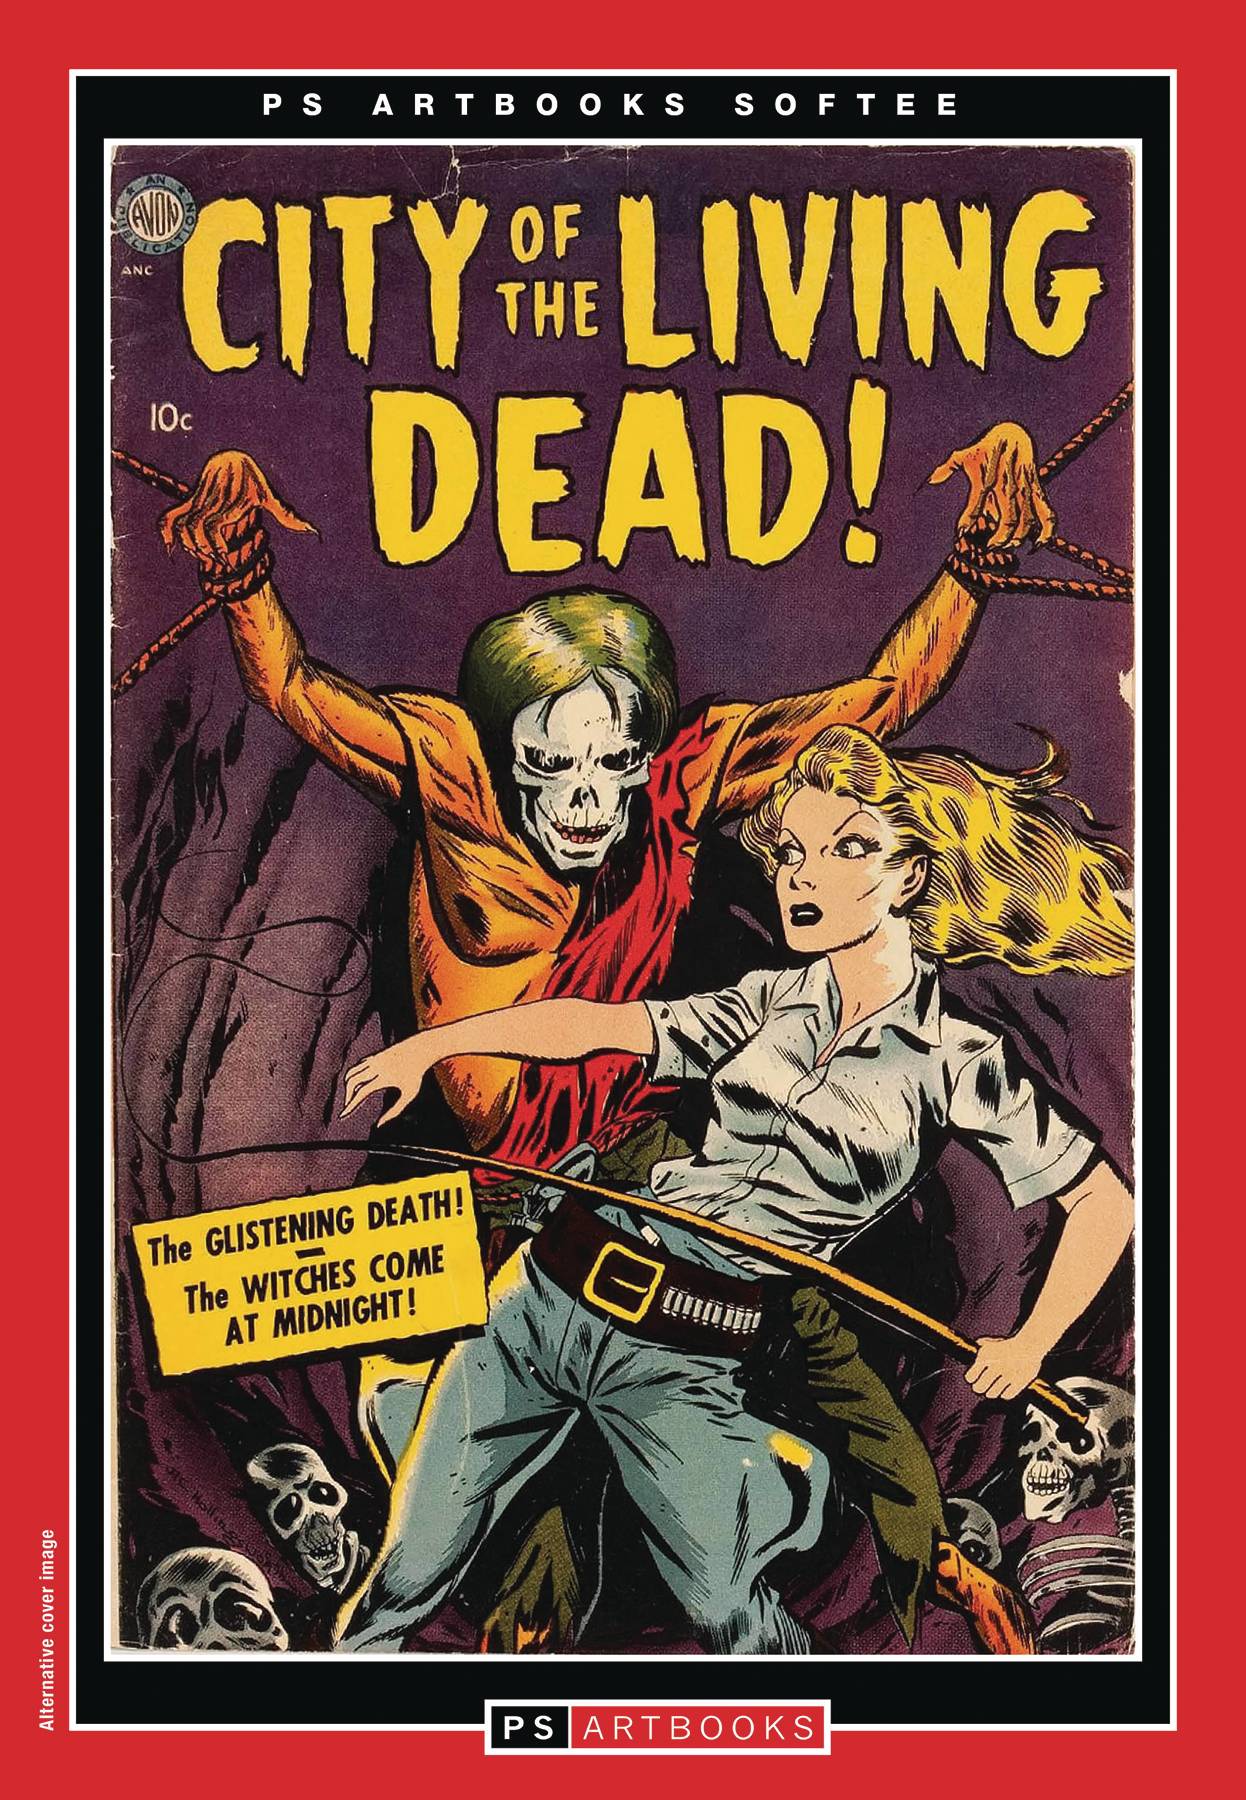 Weird Adventures Softee Volume 1 City of Living Dead Variant Cover